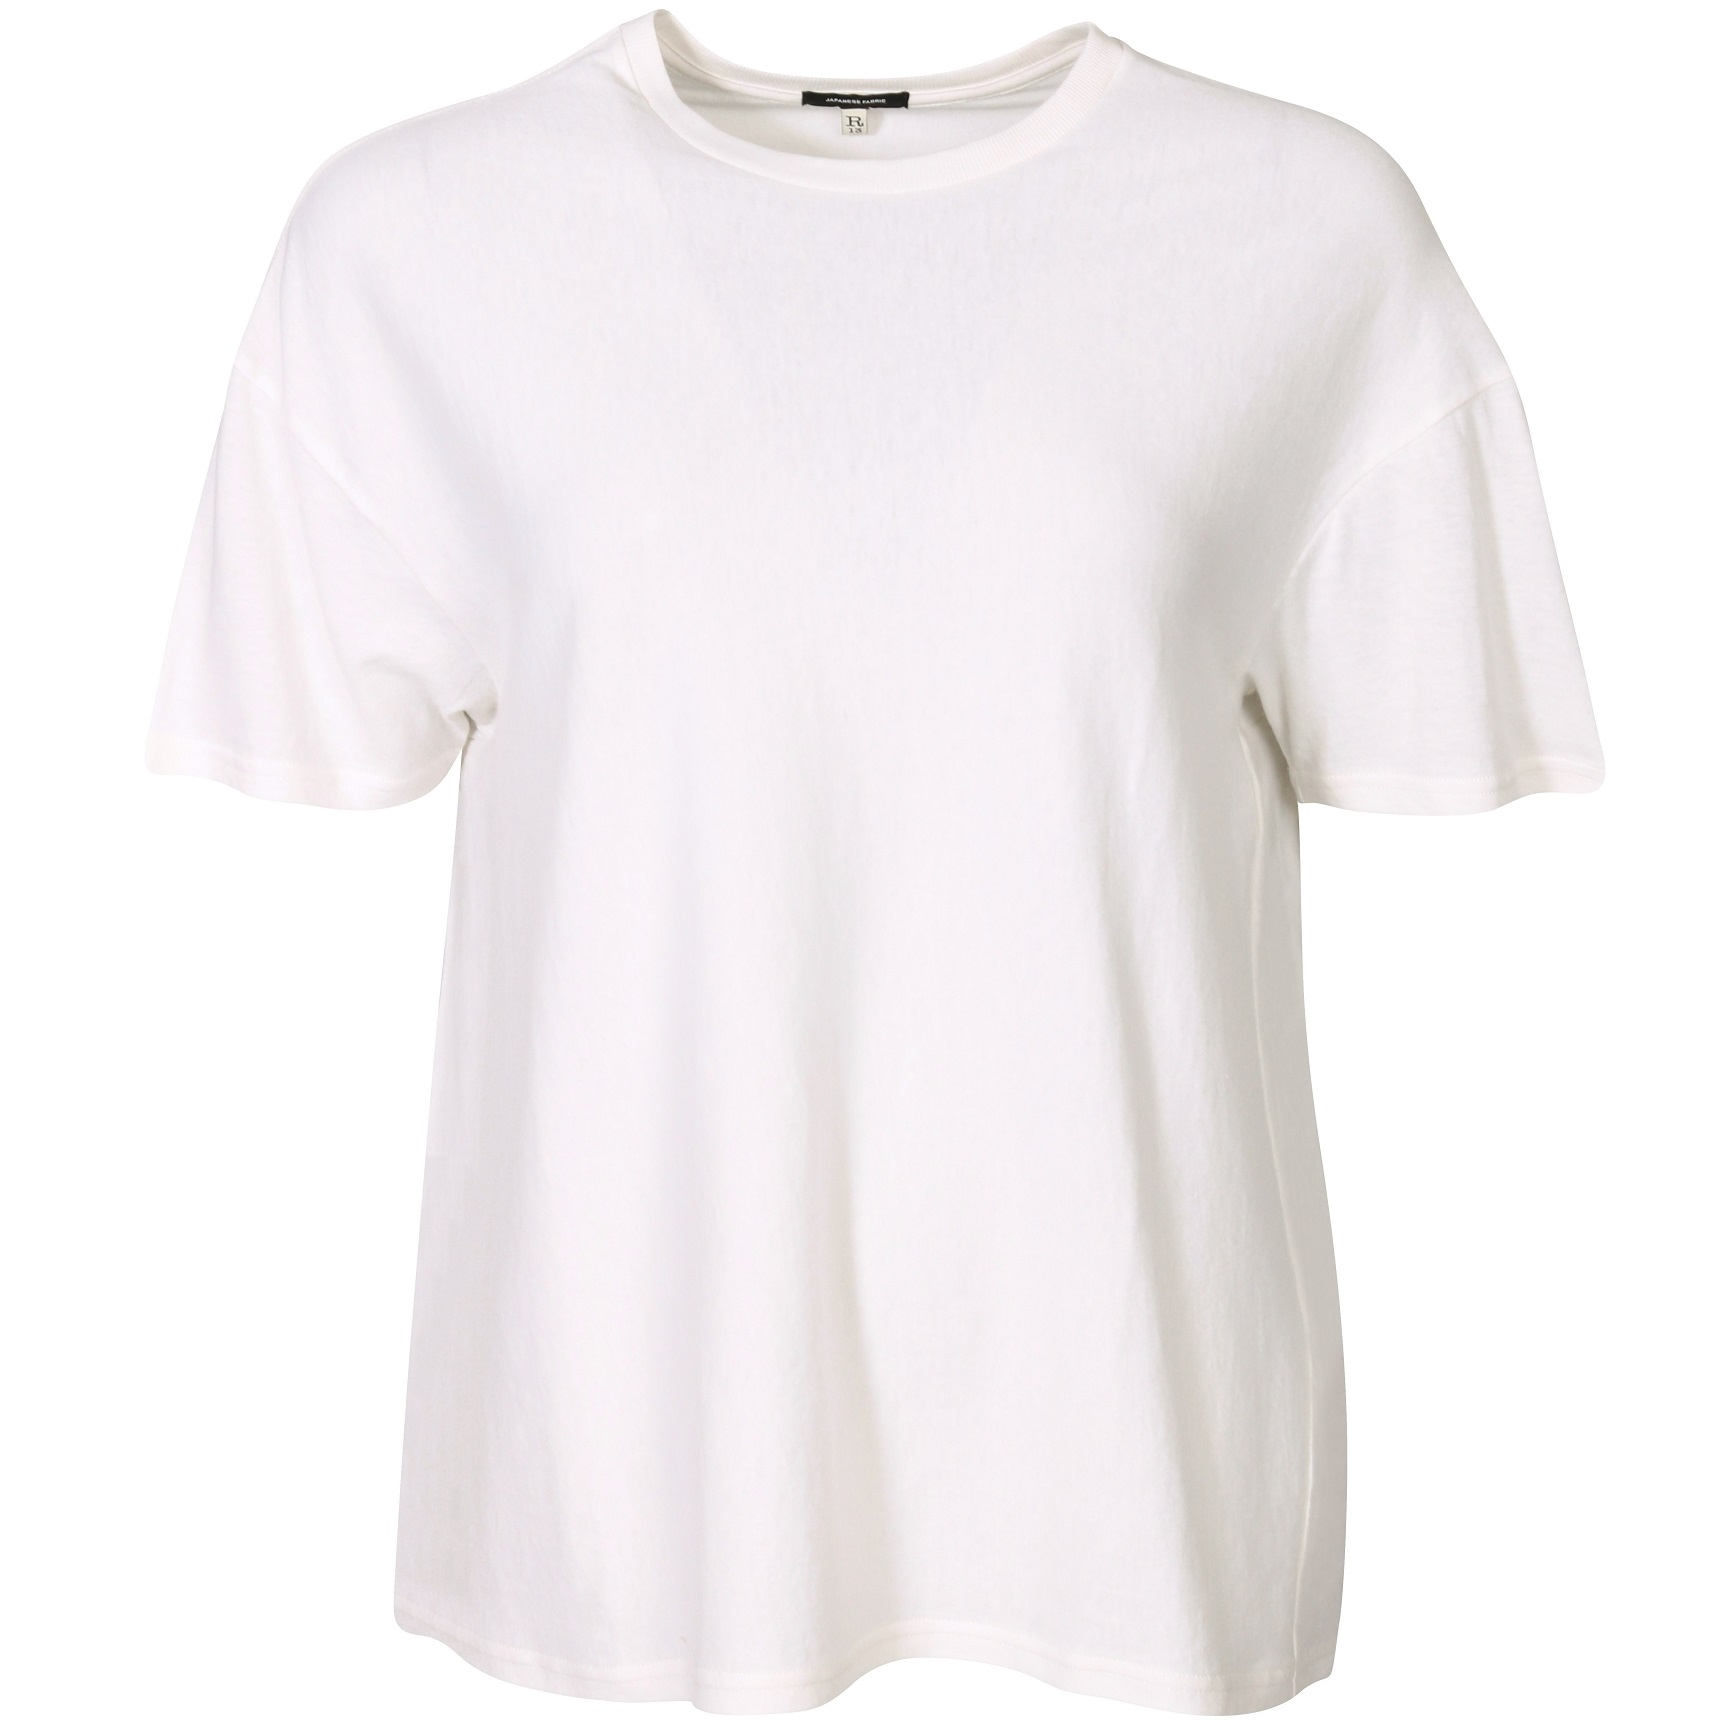 R13 Boxy Seamless T-Shirt in White S